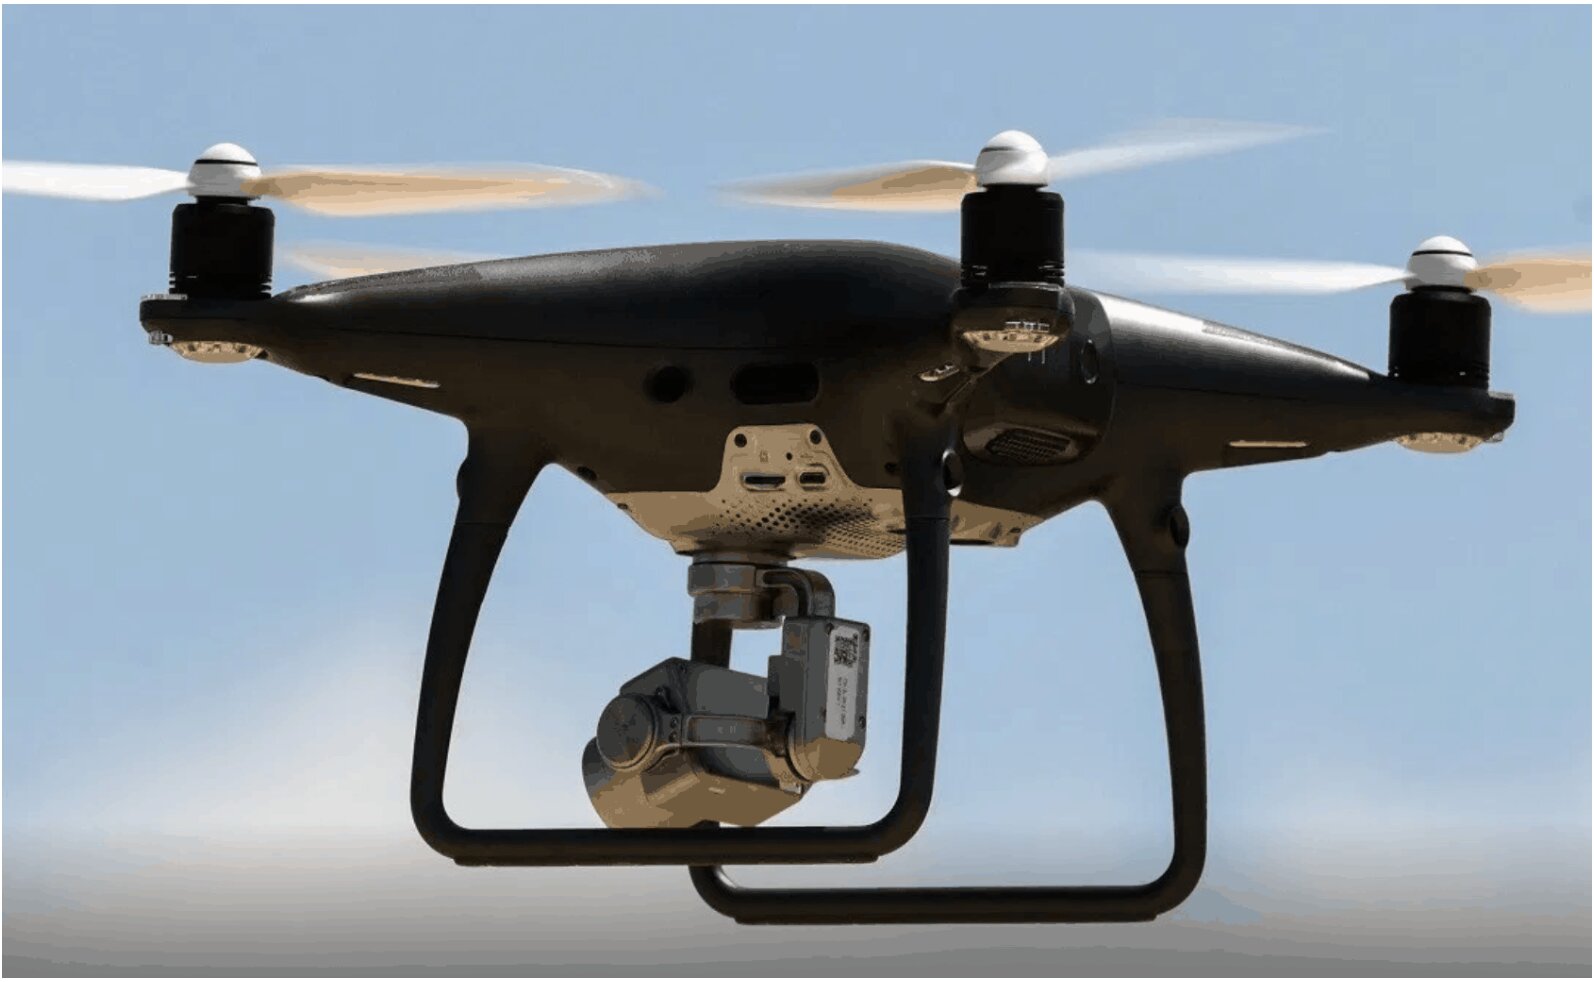 Drones will monitor citizens to ensure compliance to lockdown laws